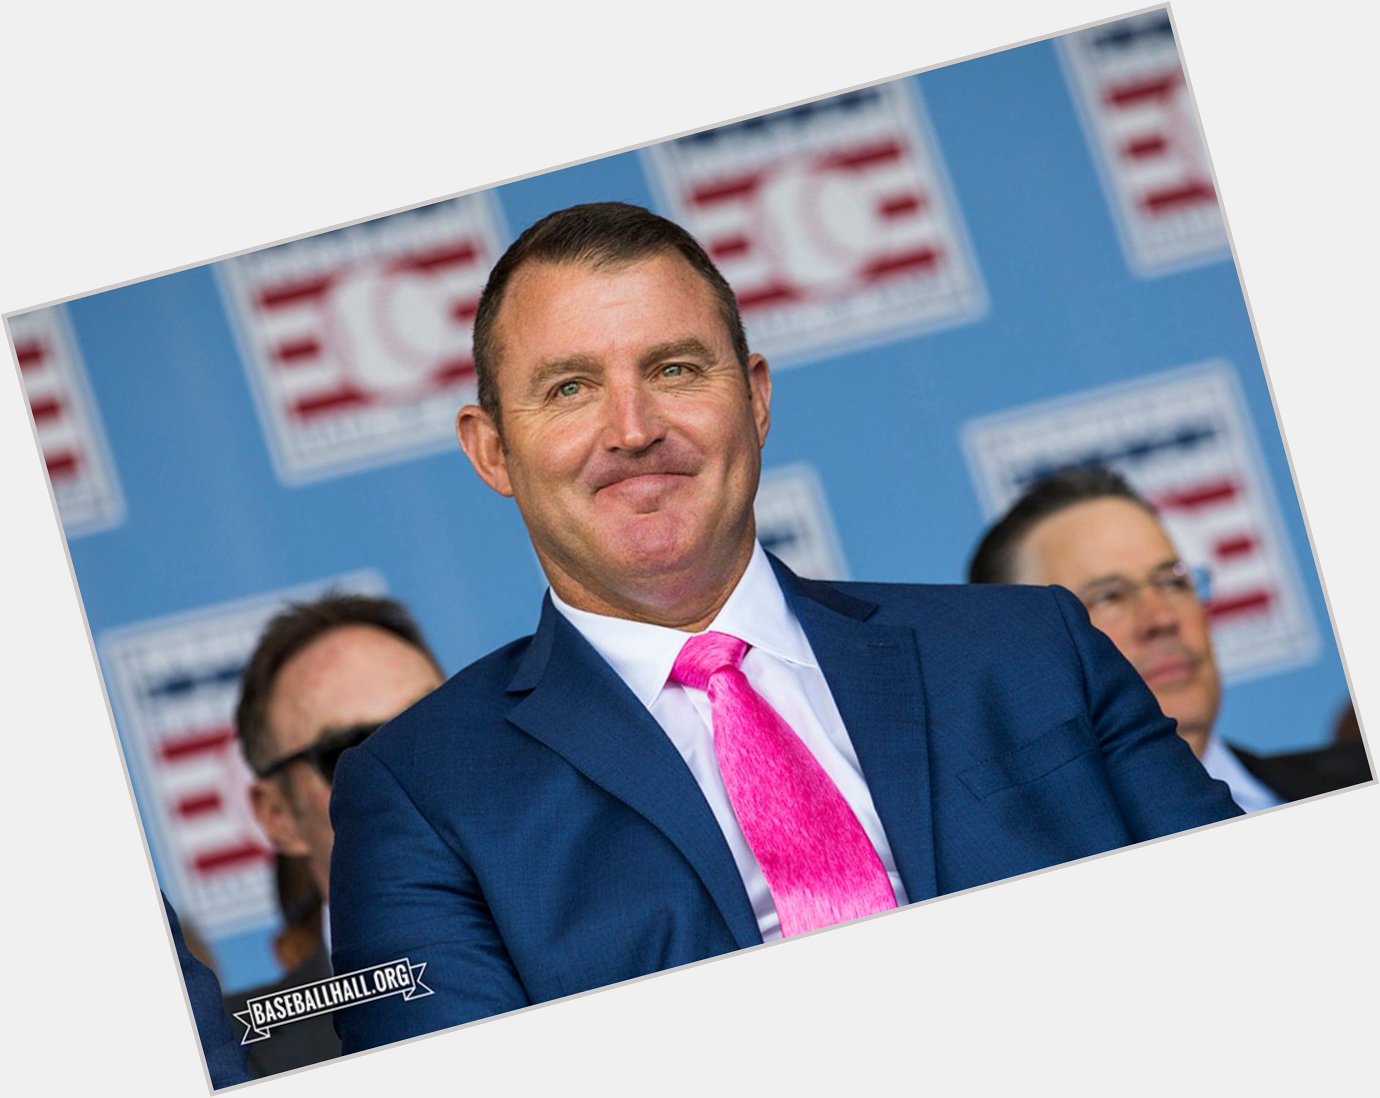 It must feel great to be 48! Happy birthday to legend Jim Thome! Milo Stewart Jr.  